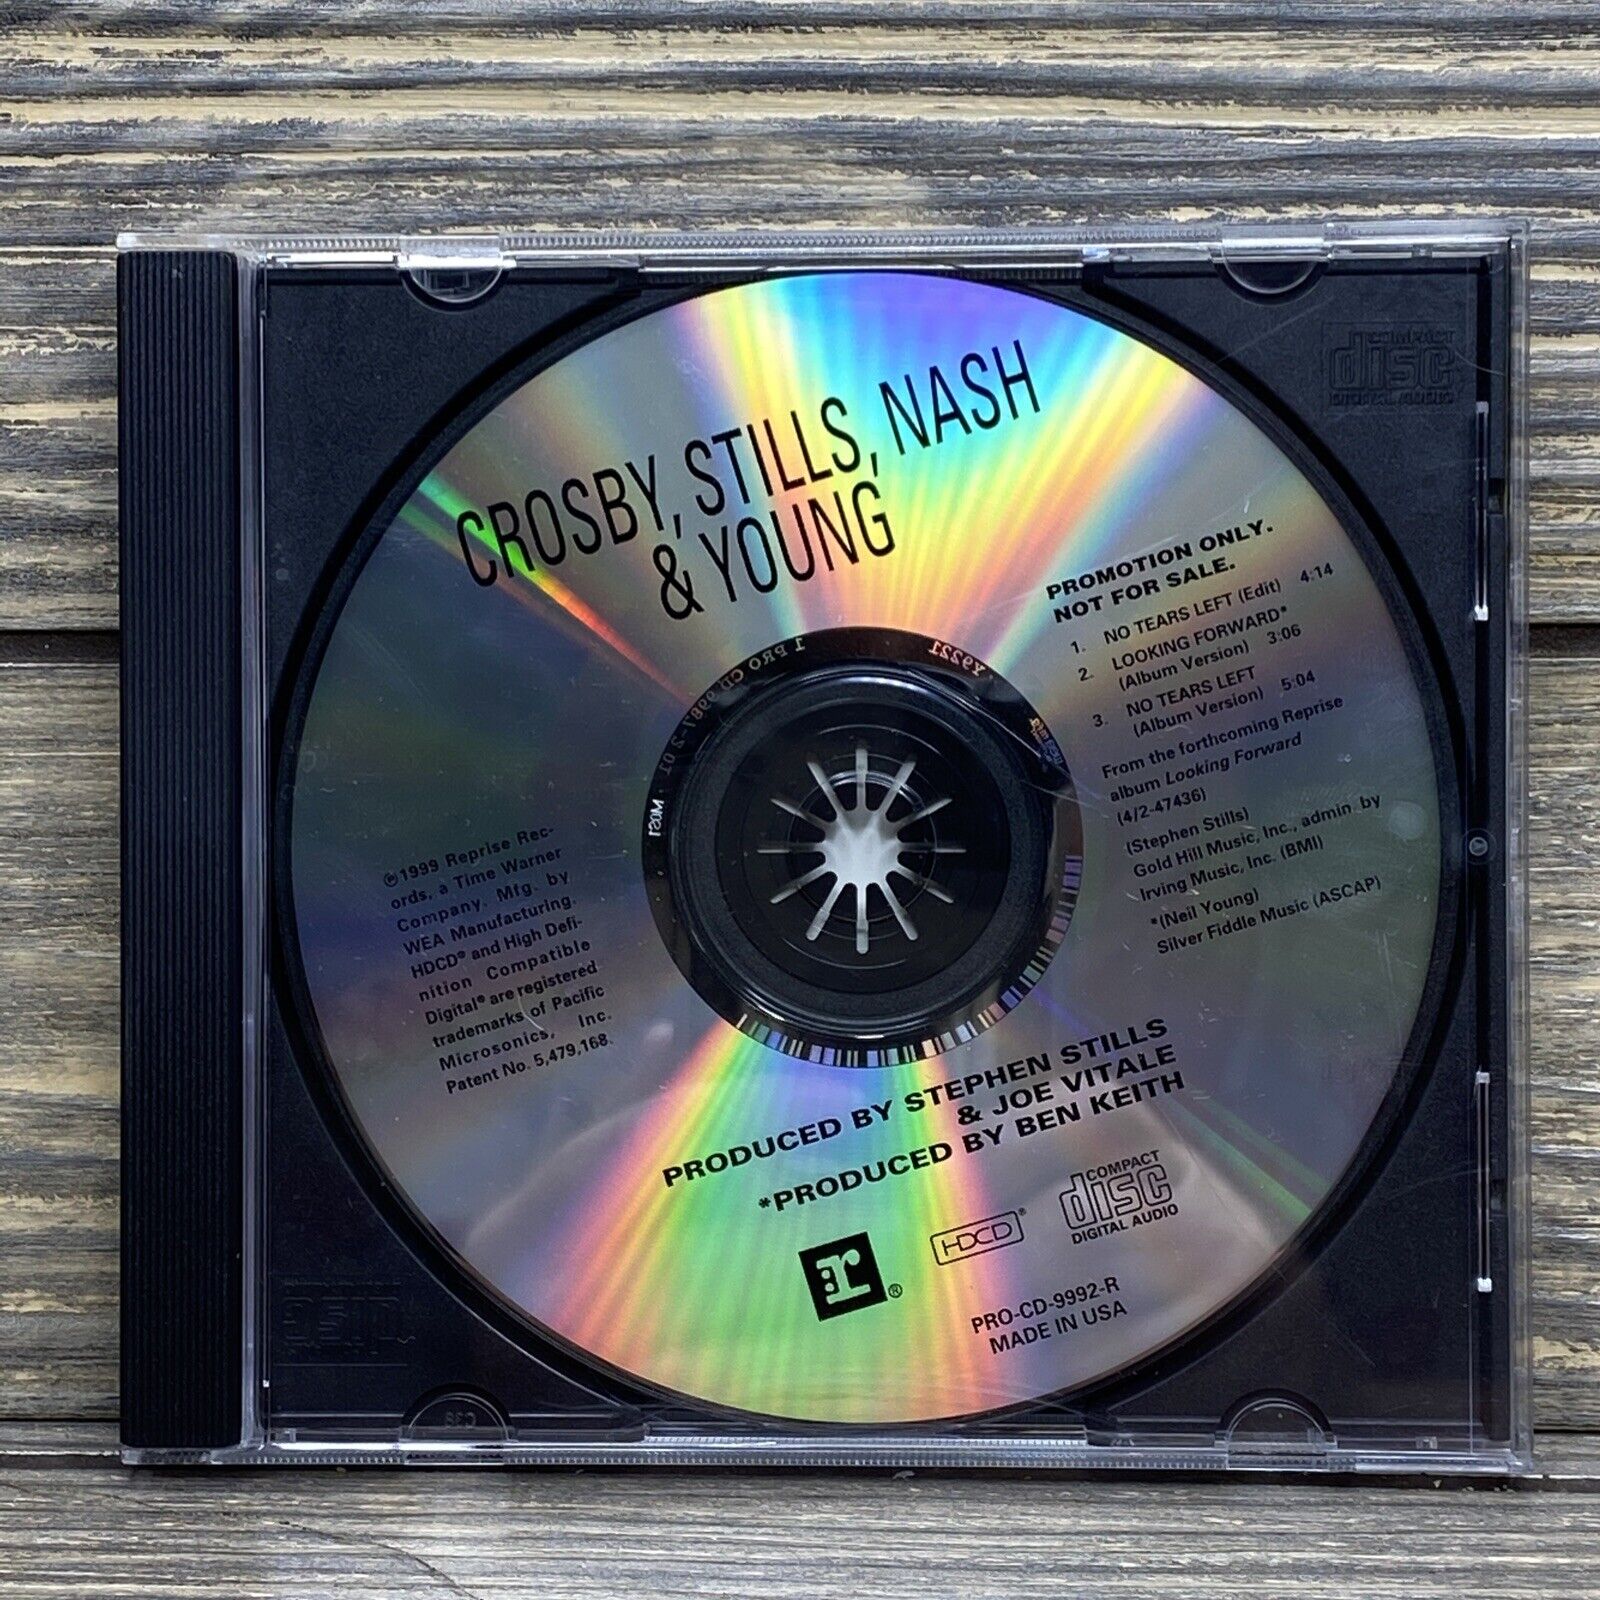 Vintage Promotional CD Crosby Stills Nash and Young 1999 Reprise Records